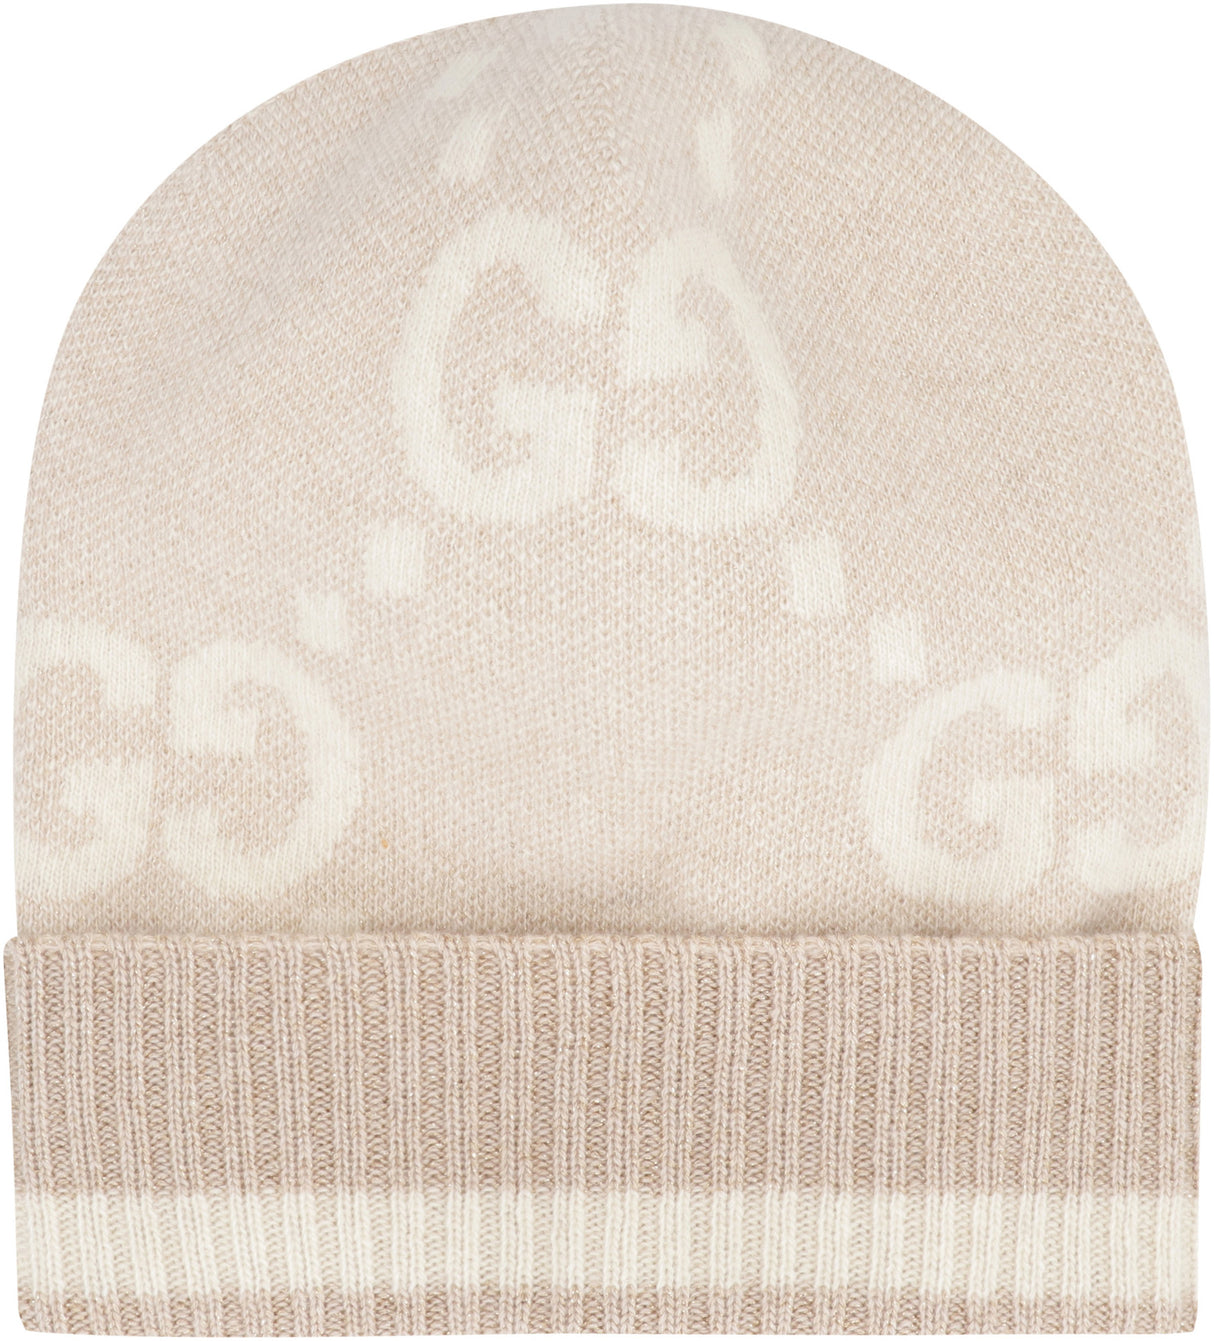 GUCCI Luxurious Sand Knit Beanie with GG Jacquard Motif and Metallic Threads for Women